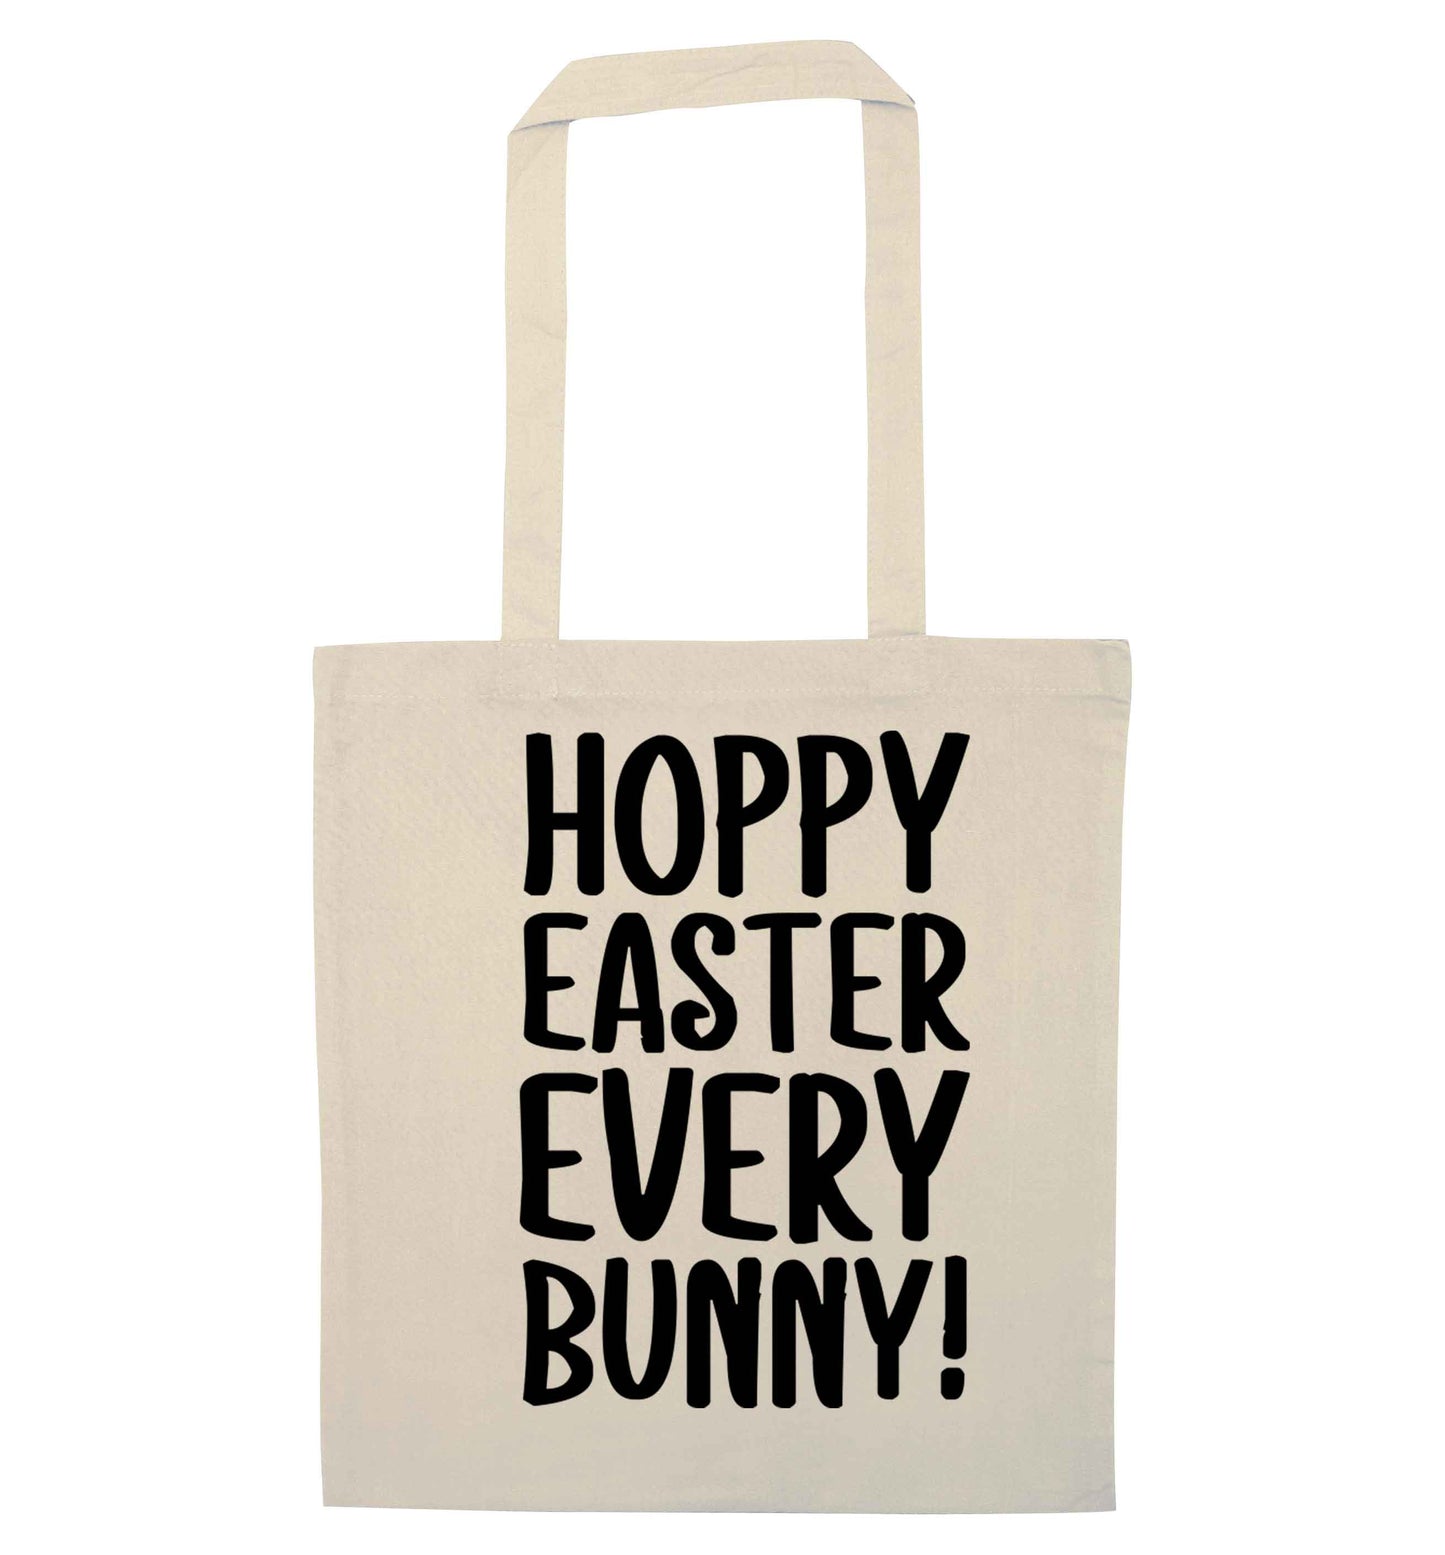 Hoppy Easter every bunny! natural tote bag